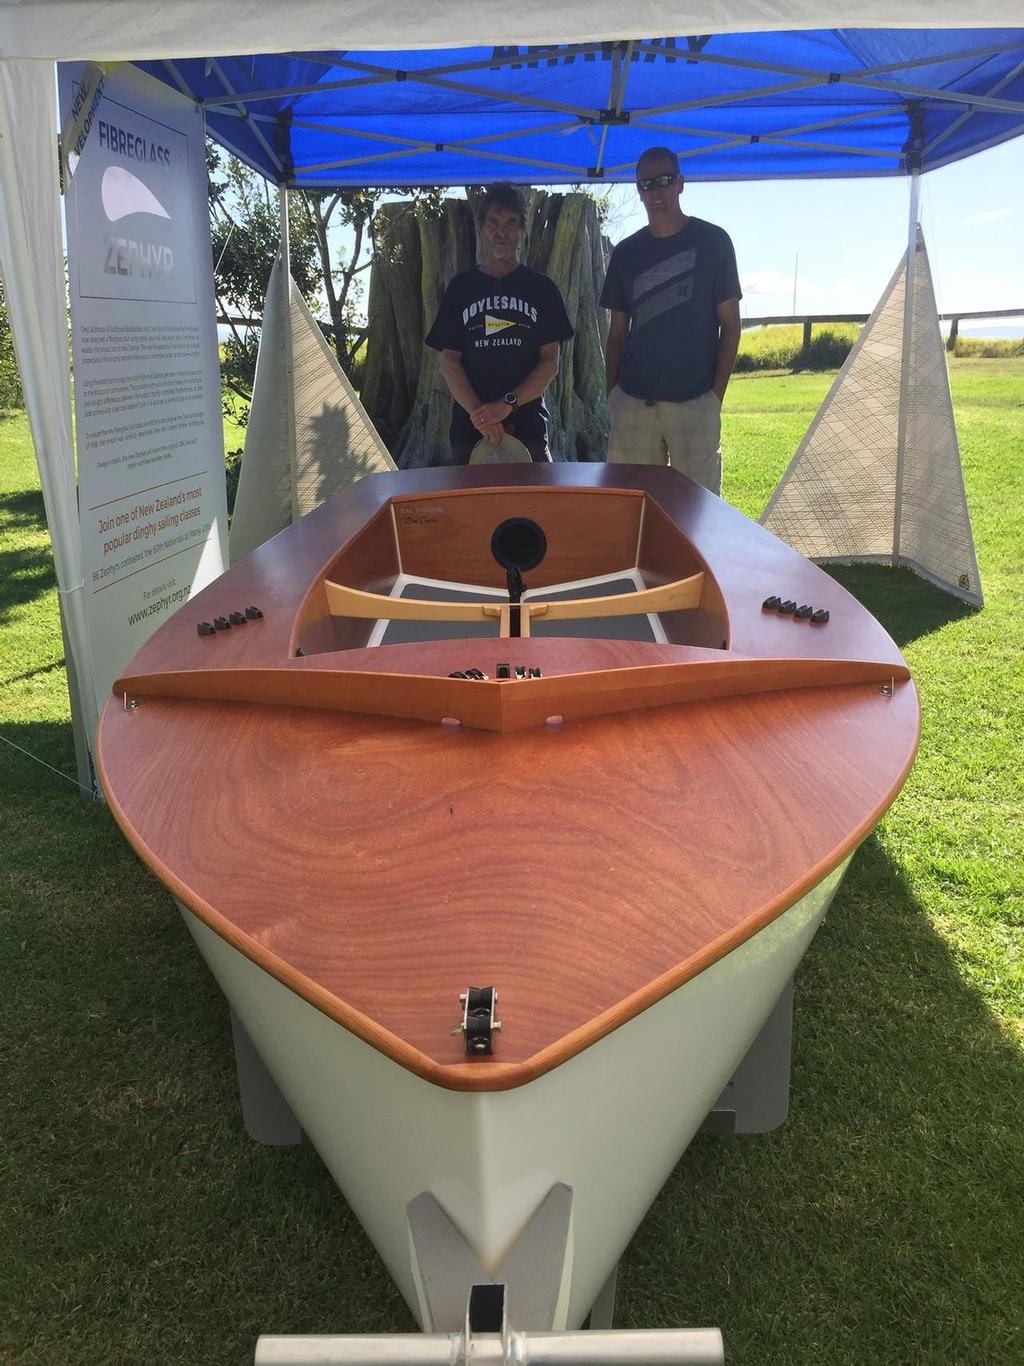 New Glass hull - 60th Zephyr Nationals - Manly, April 2016 © Zephyr Owners Association